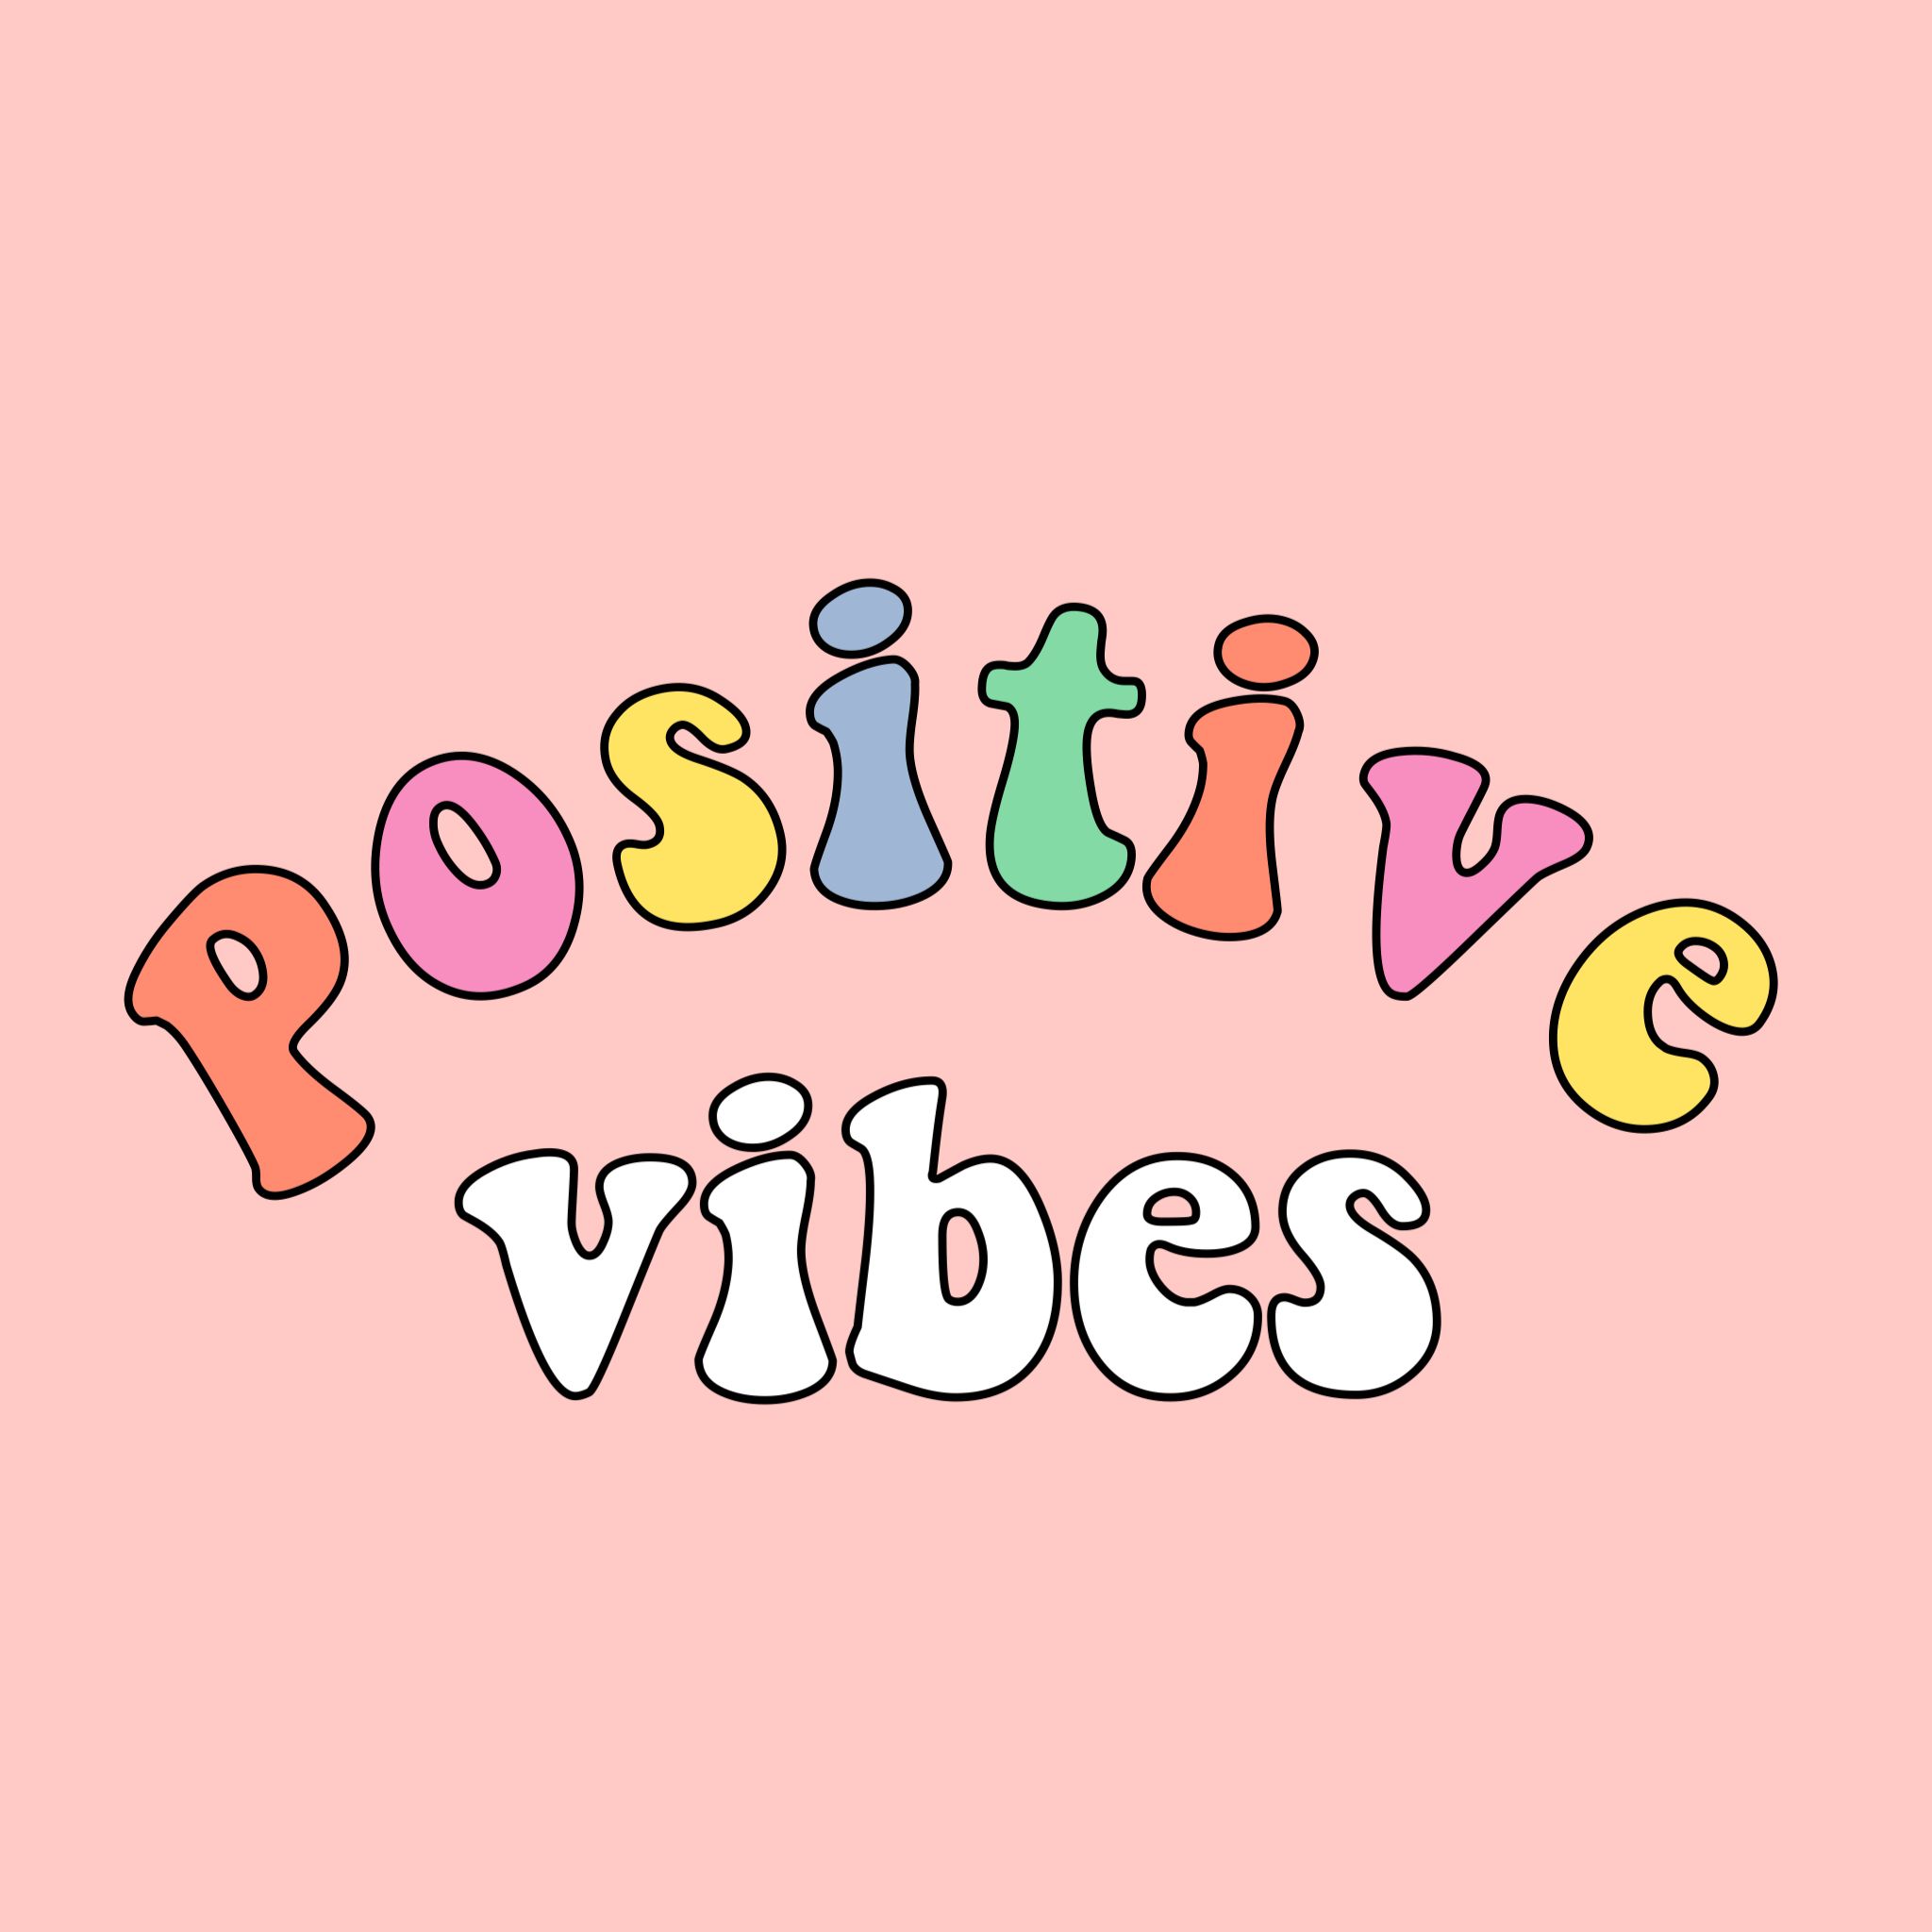 Positive vibes - colorful lettering on a pink background - VSCO, positive, coral, pastel rainbow